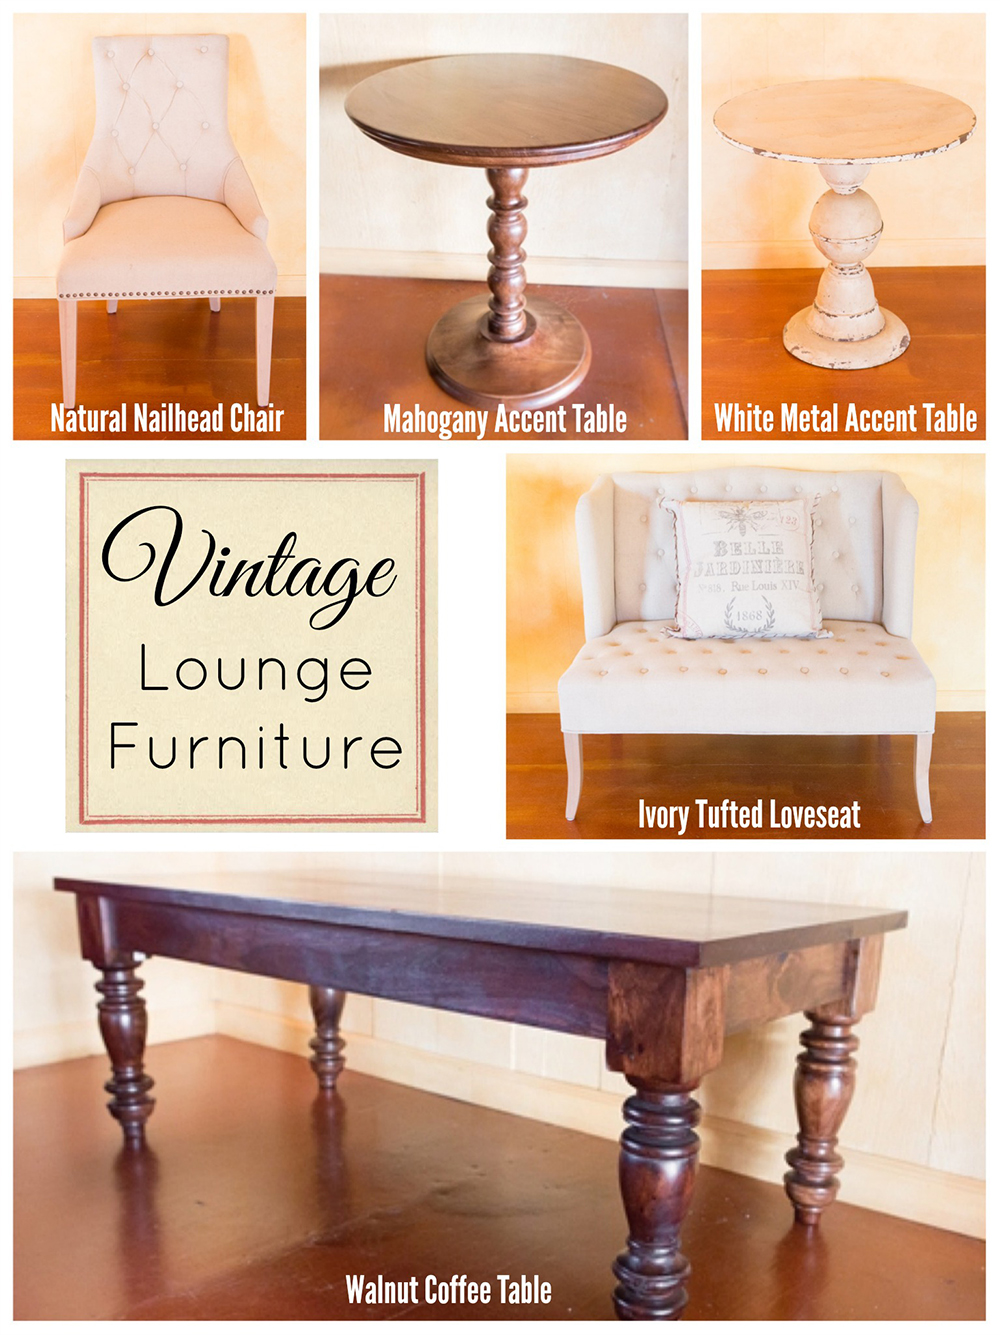 Rent Vintage Lounge Furniture in Wine Country